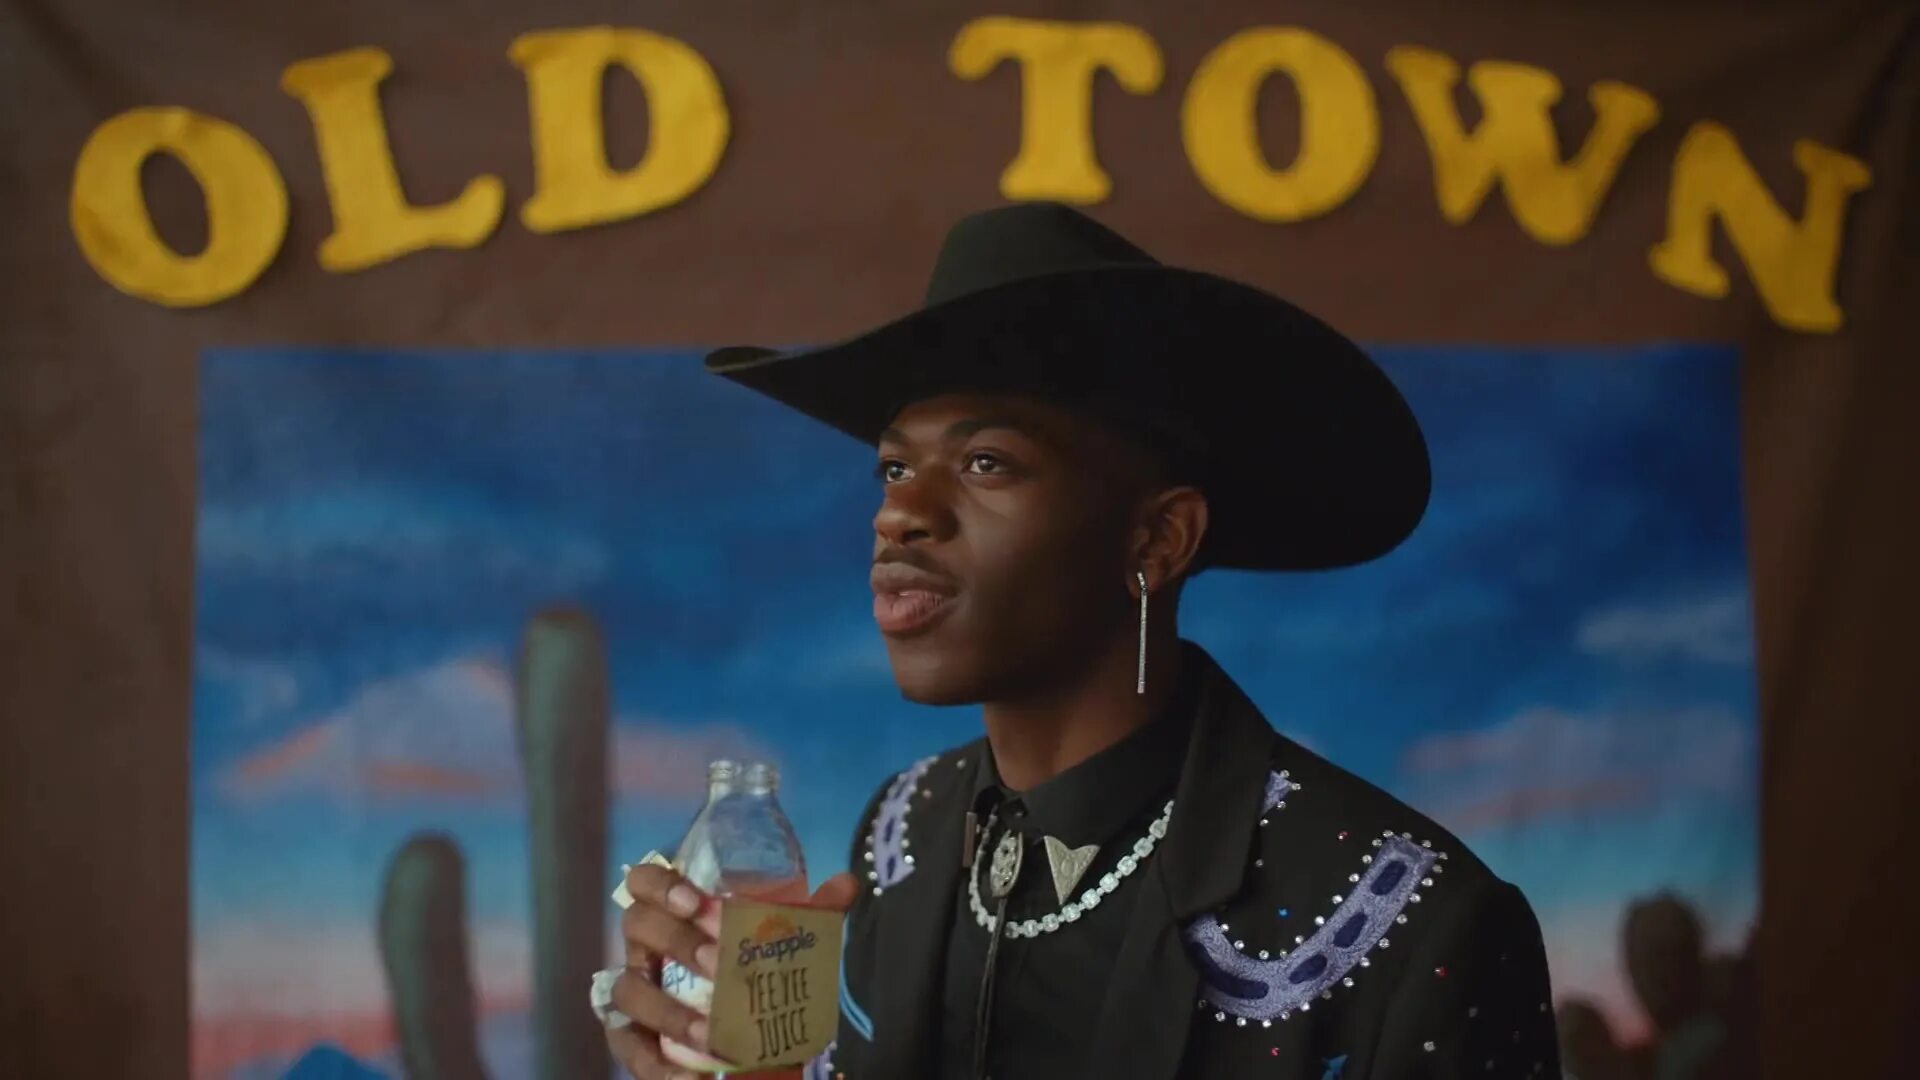 Old town remix. Lil nas x old Town Road. Lil nas x ковбой. Lil nas x’s old Town Road.